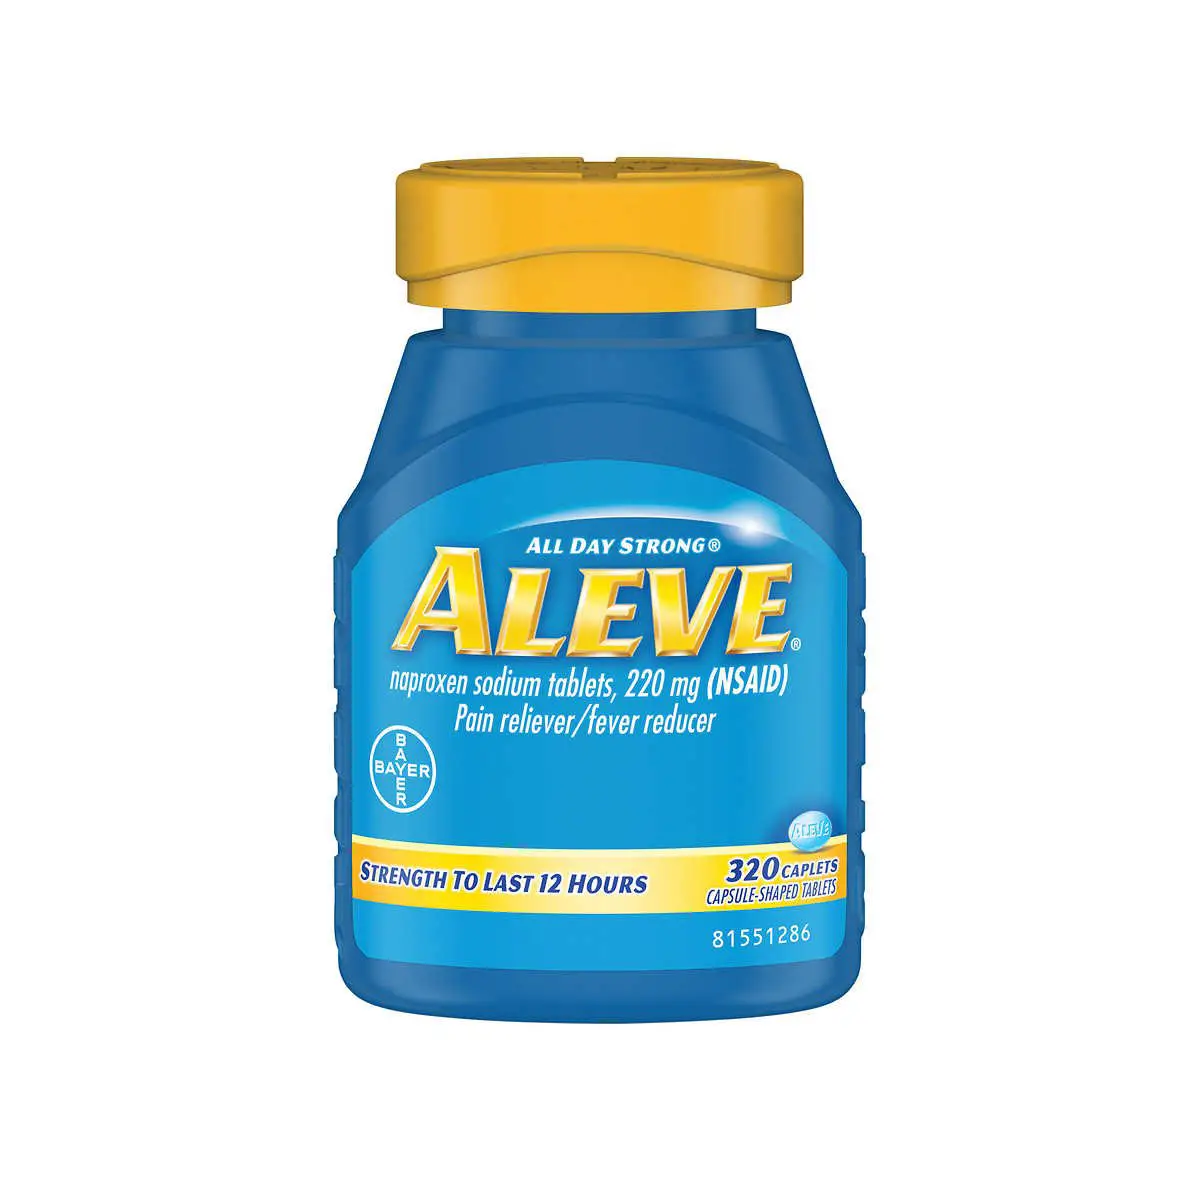 Aleve Pain Reliever Fever Reducer 320 Taplets 220 mg Naproxen Sodium